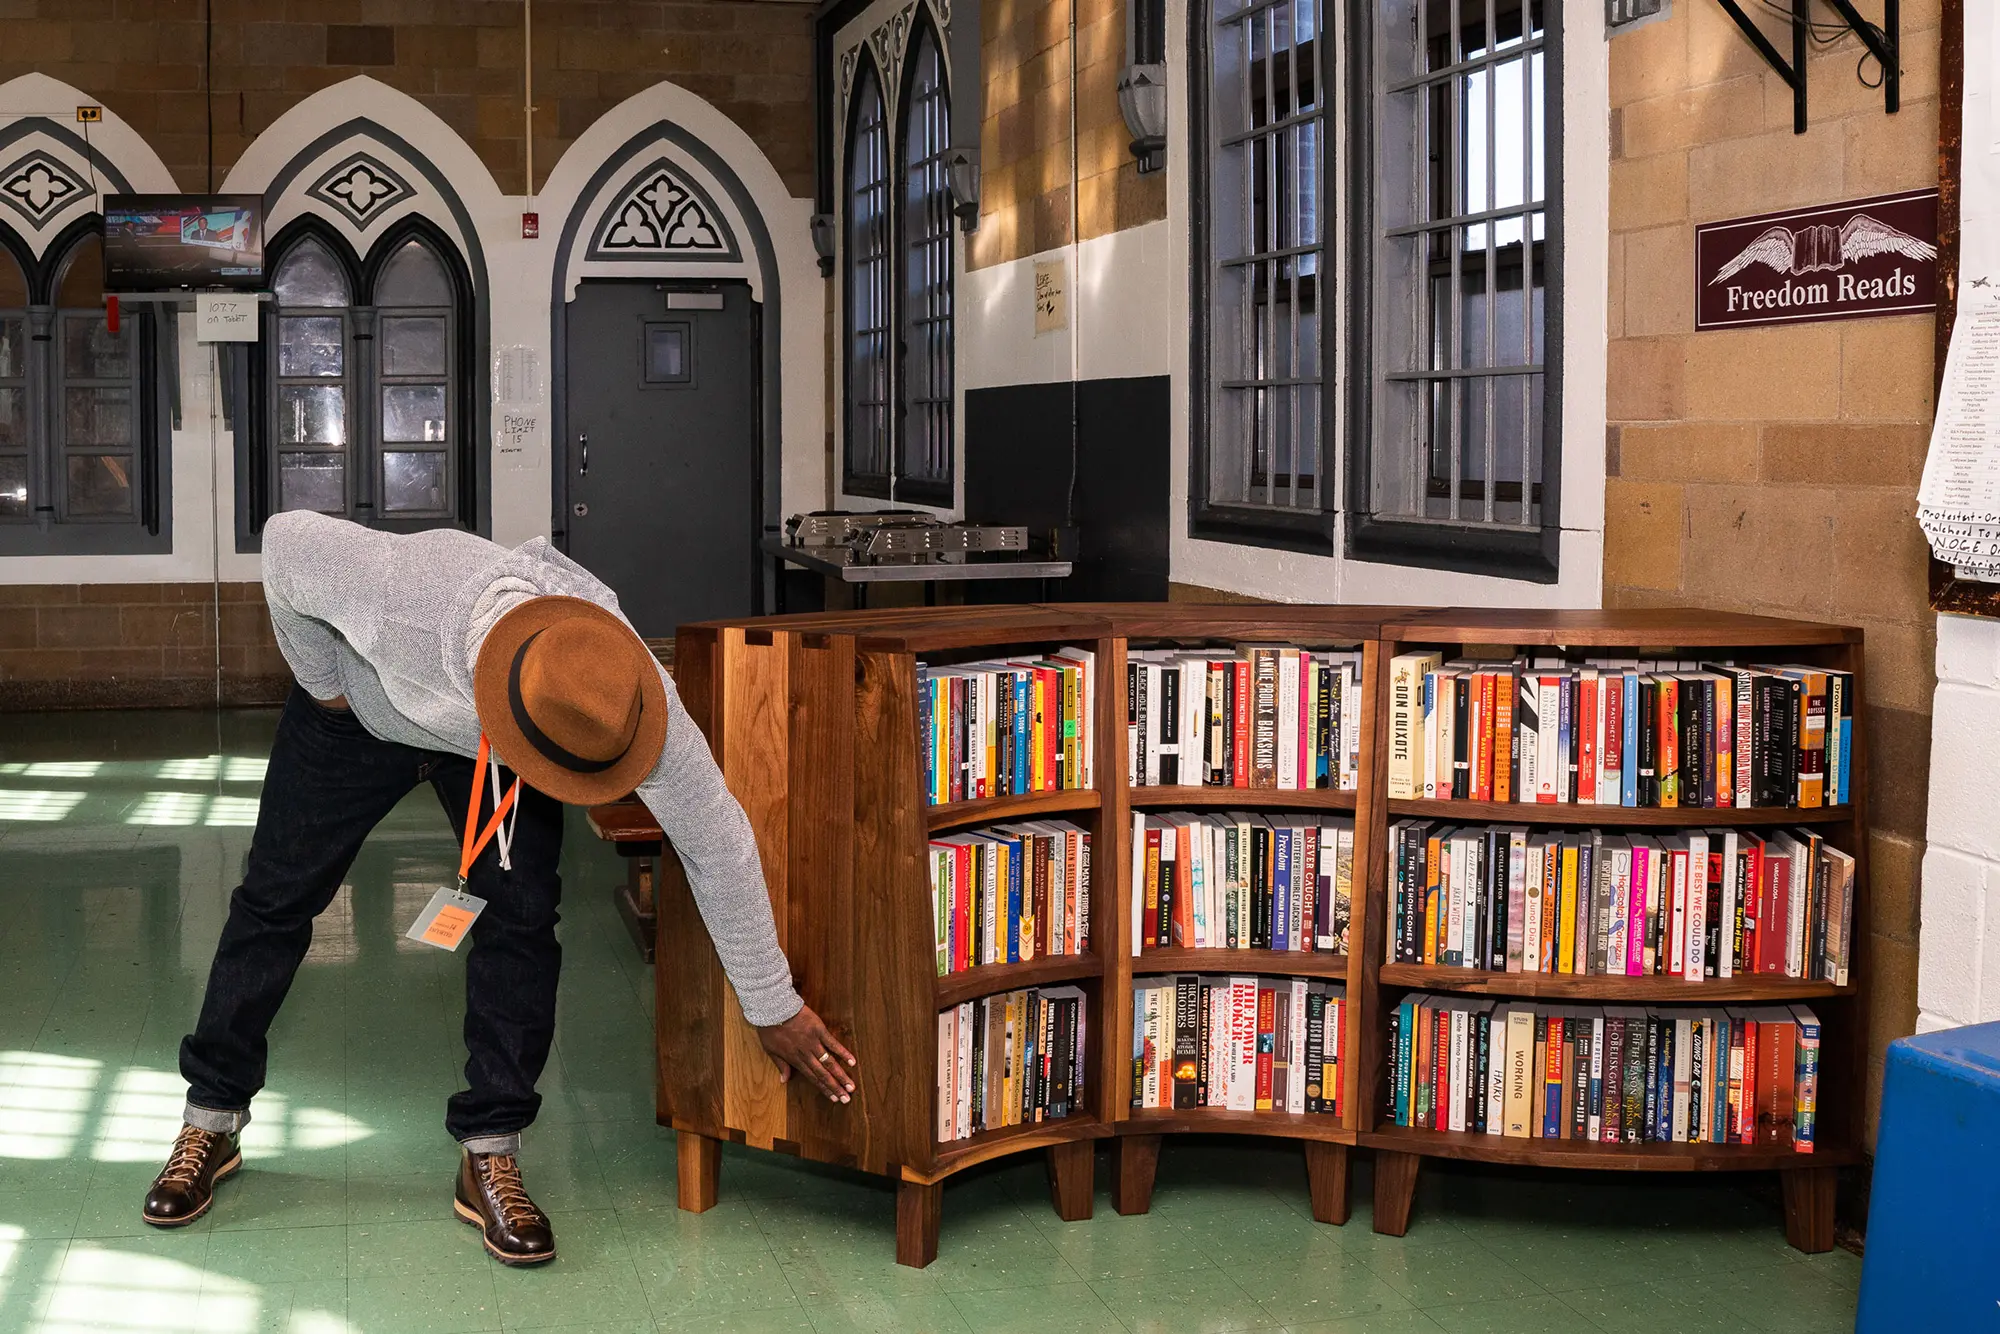 Freedom Reads Founder & CEO Reginald Dwayne Betts leans down, passing his hand appreciatively over the smooth, curving wood of a newly opened and fully stocked Freedom Library at Woodbourne Correctional Facility in New York.